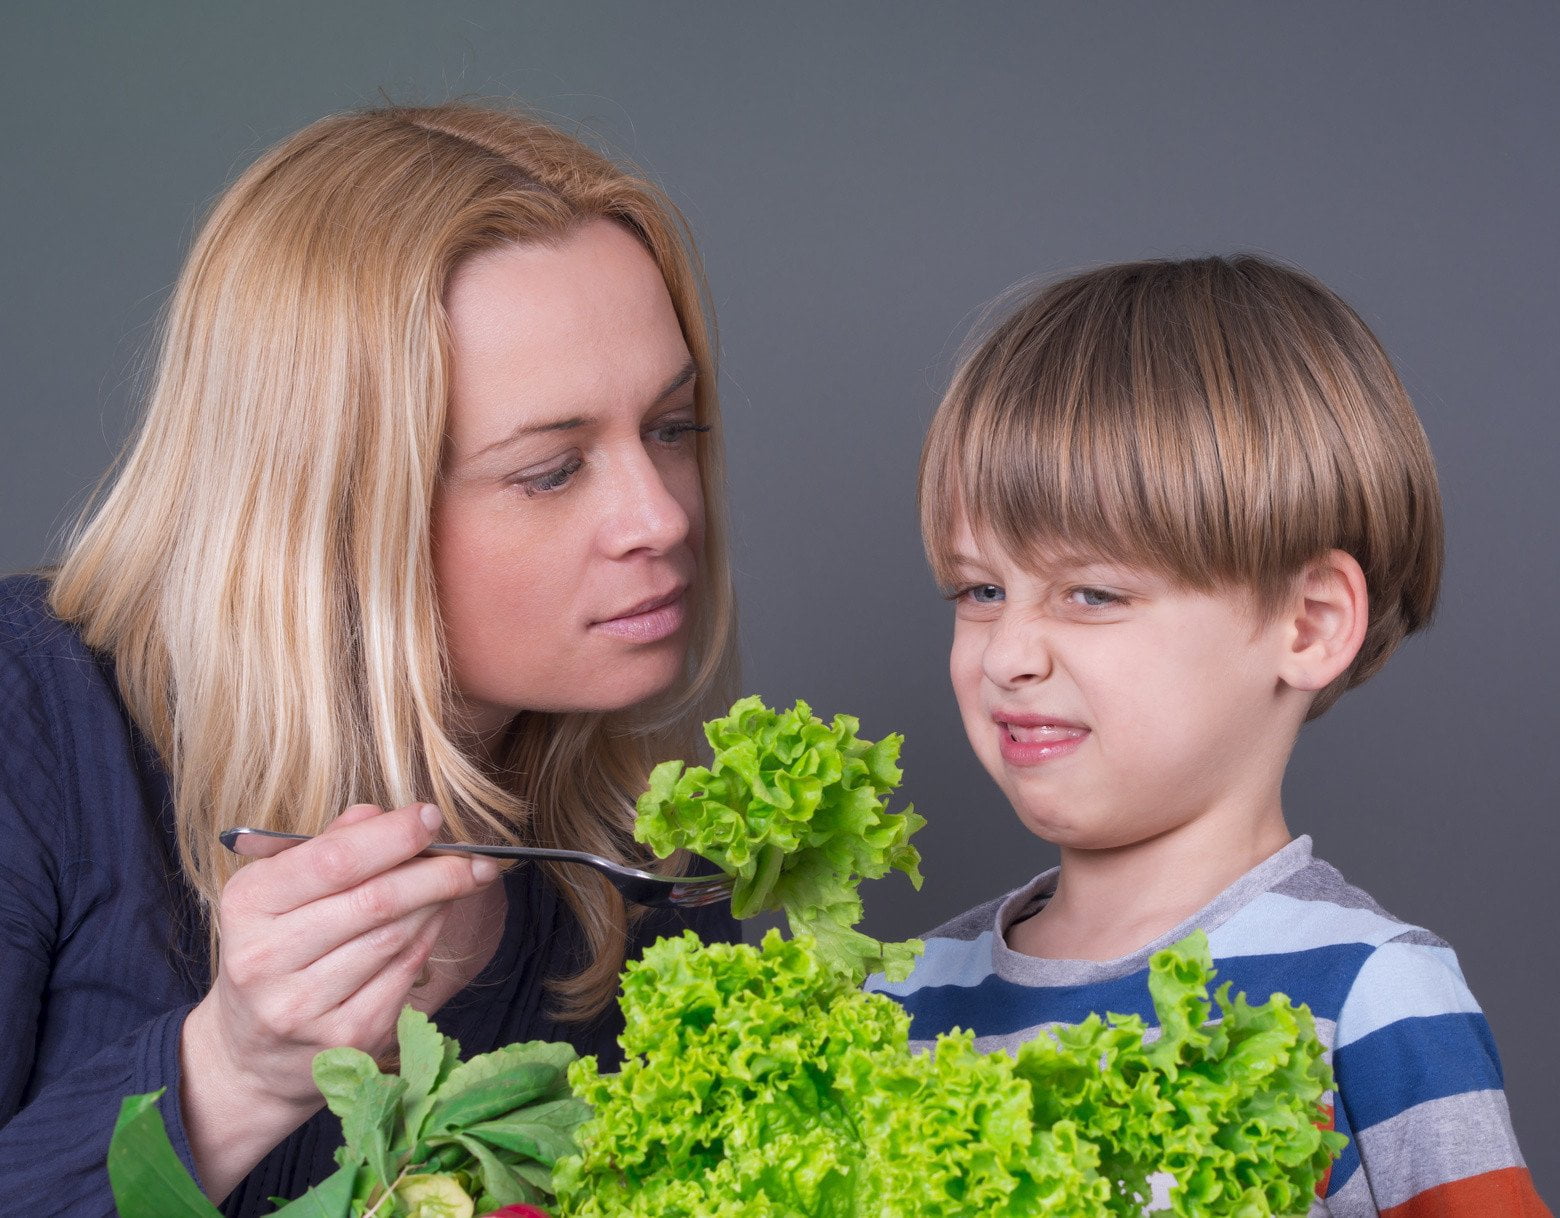 Is your child rejecting Vegetables and Fruits?